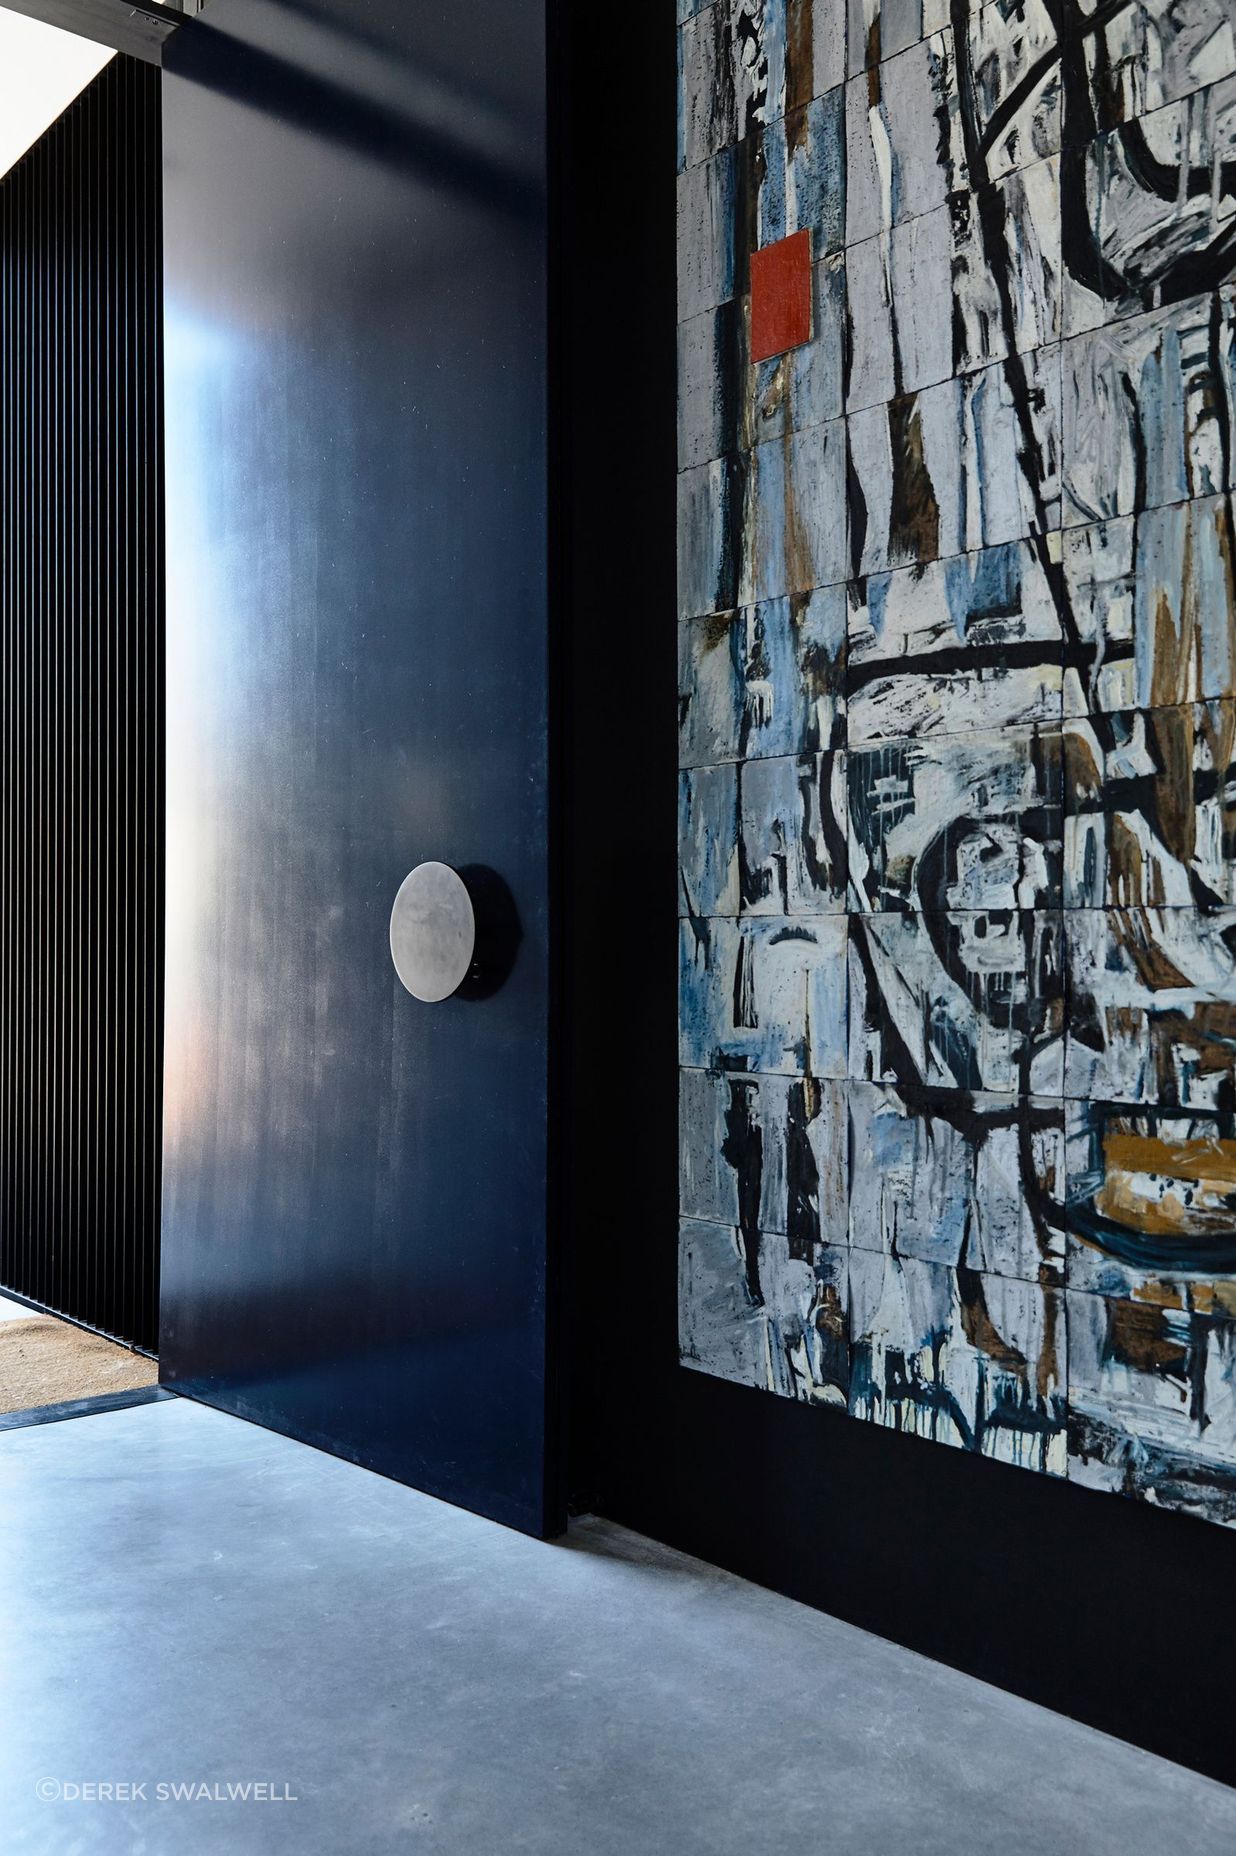 This new suburban home comfortably houses an extensive art collection.